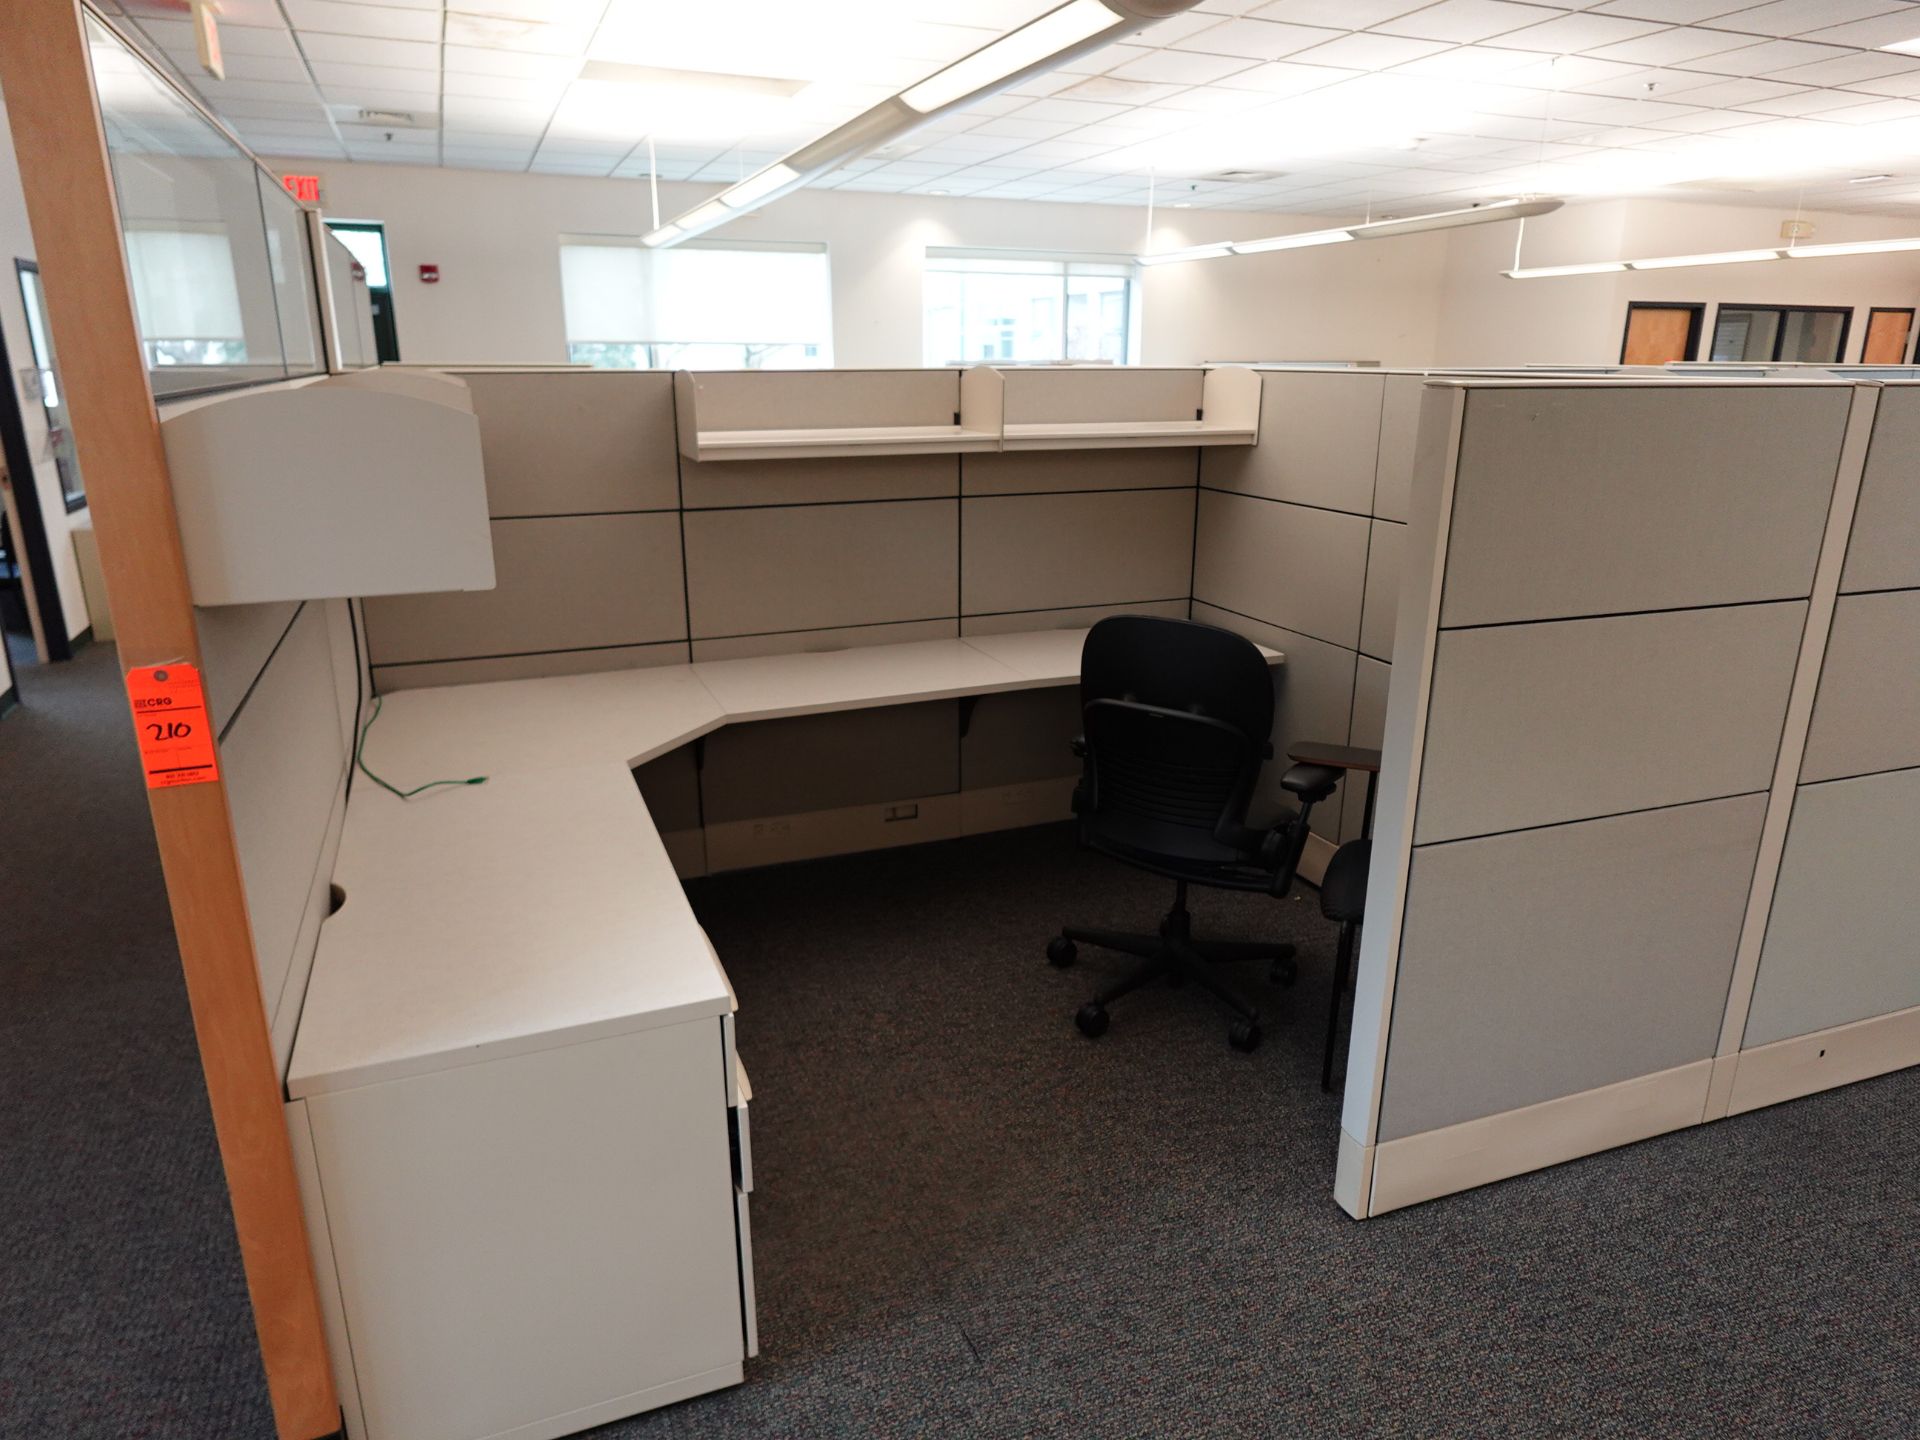 Haworth Office Cubicals - Image 7 of 11